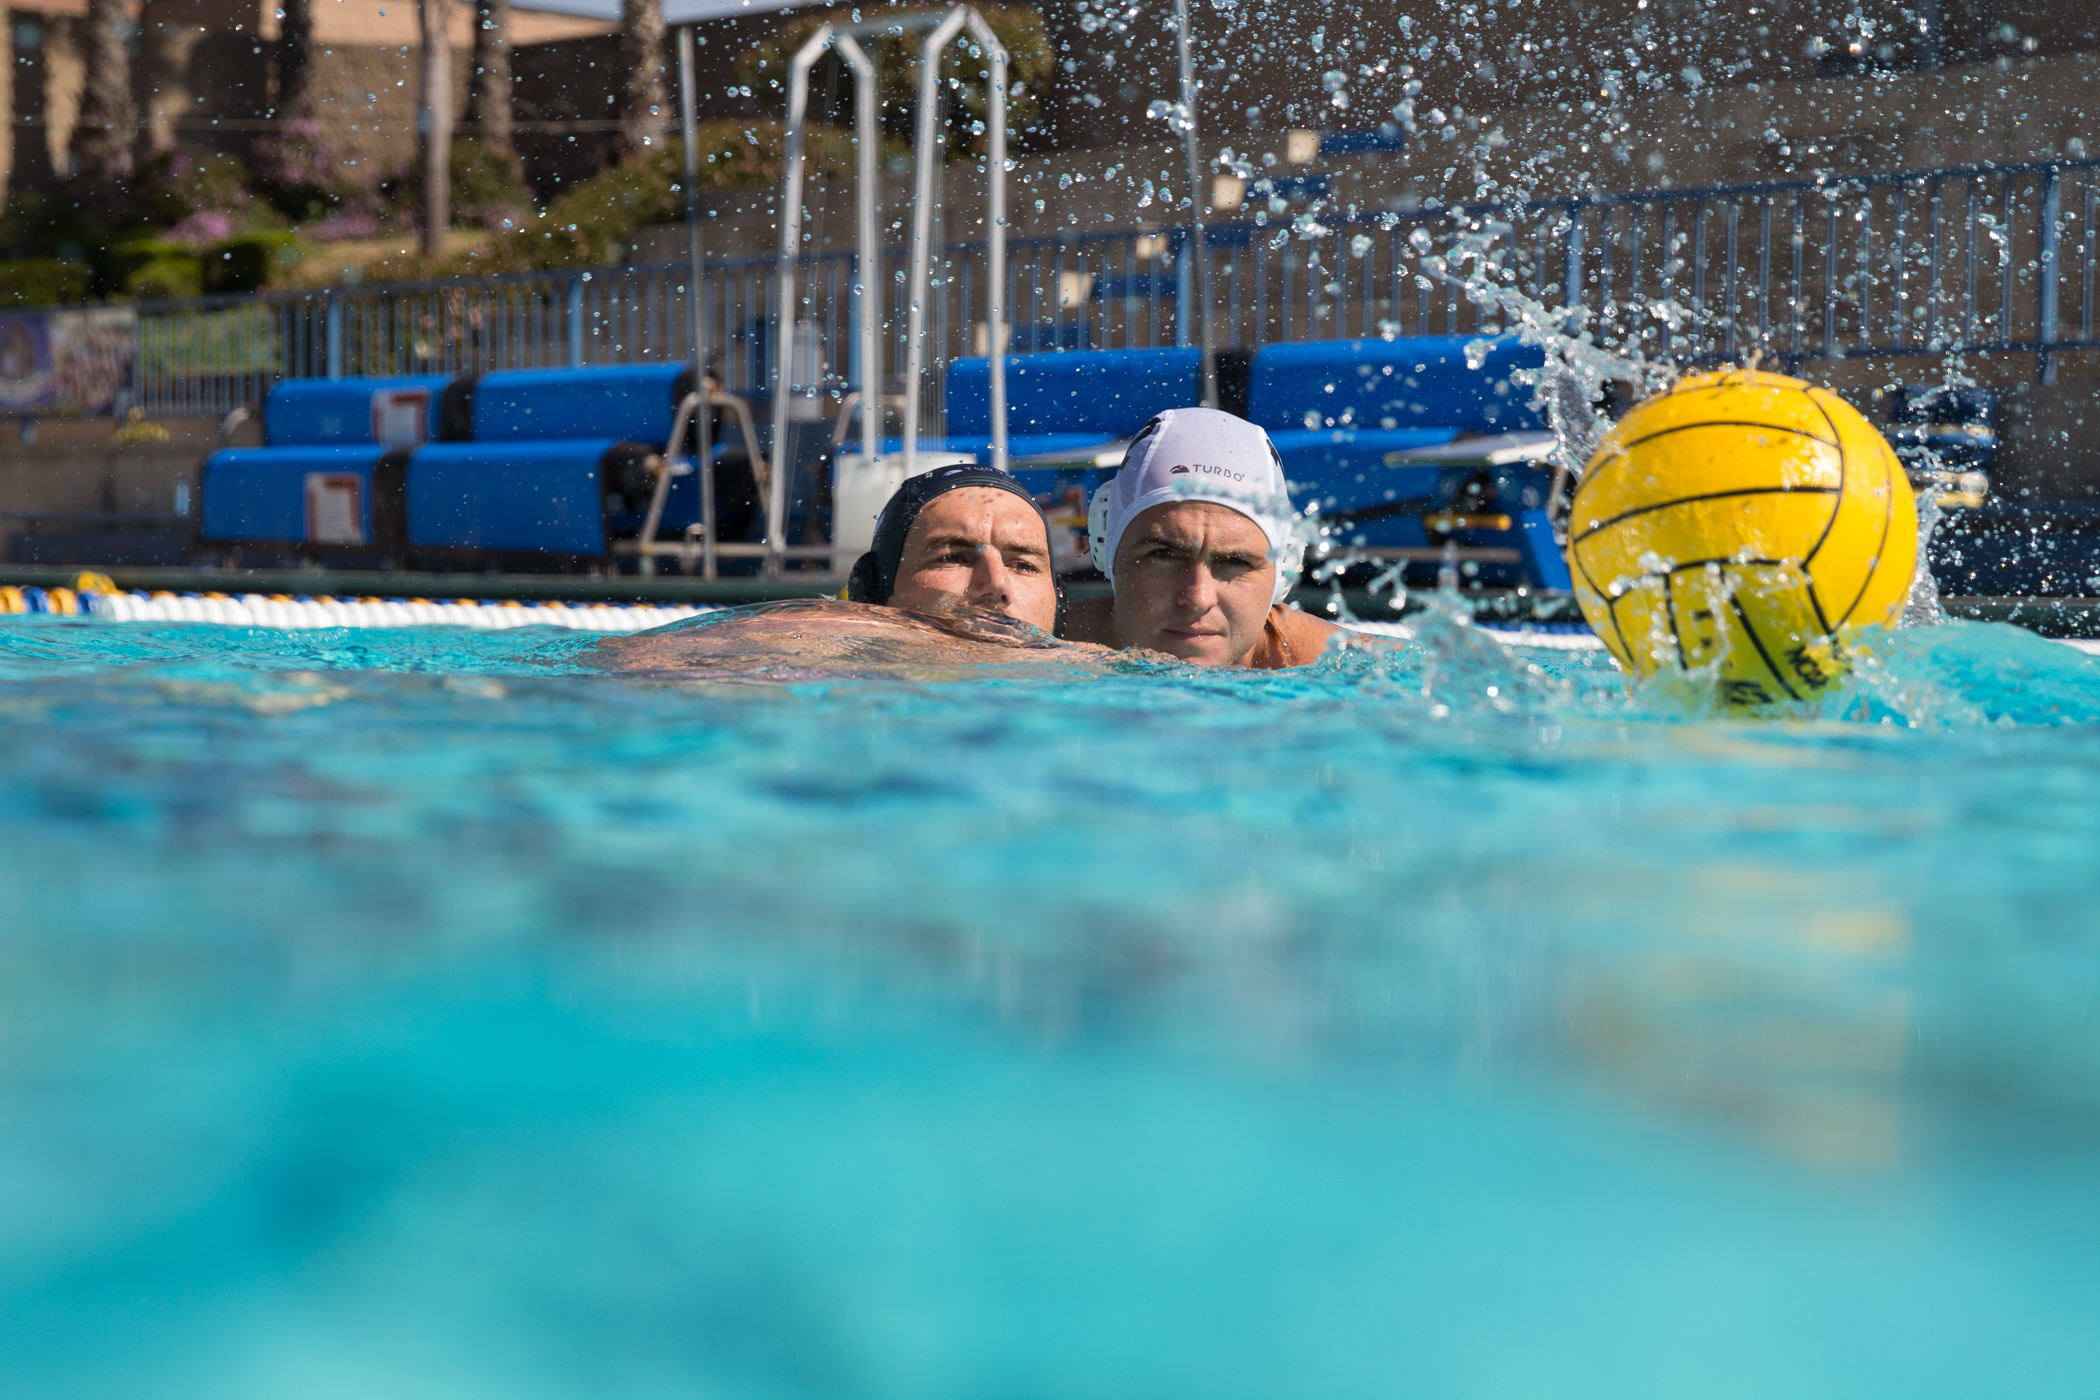 KAP7 International "Built by Water Polo Players for Water Polo Players"